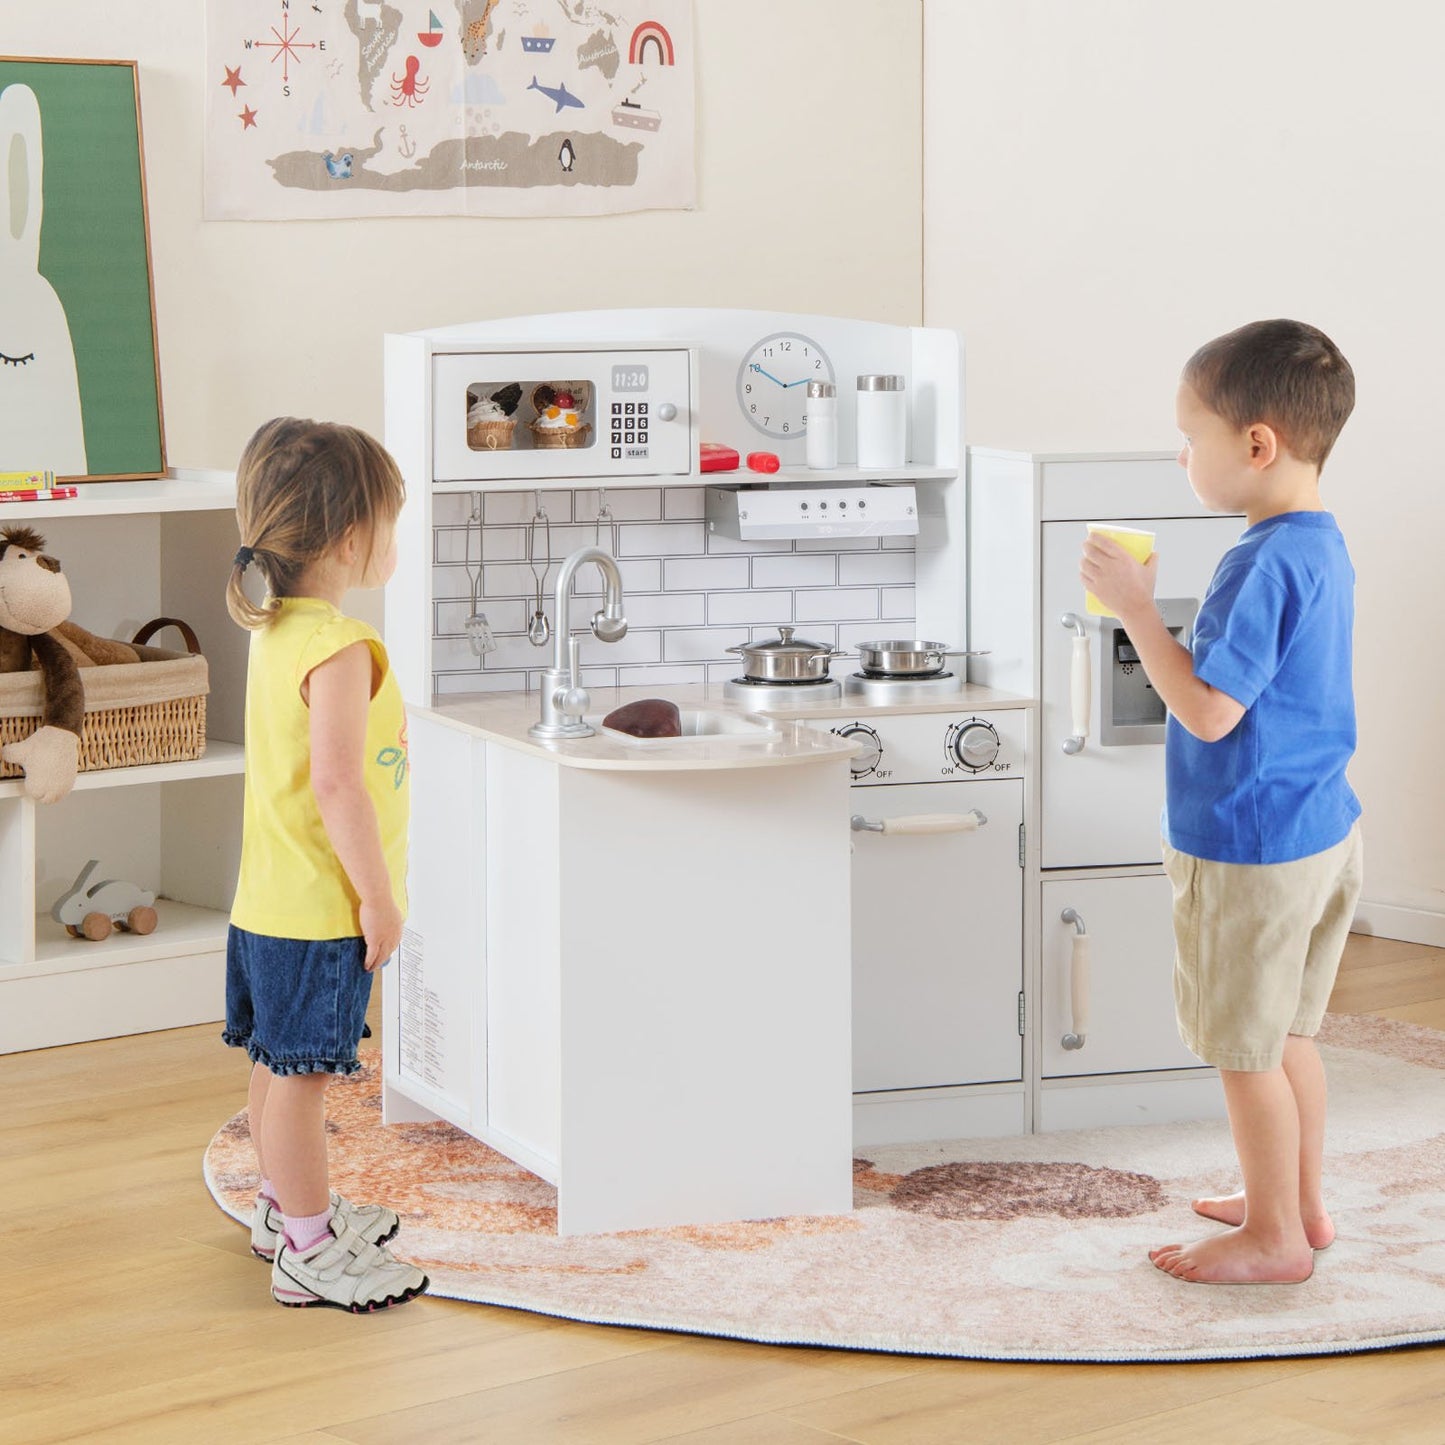 Kids Kitchen Playset Conor Kitchen Toy with Realistic Microwave and Oven Stove, White